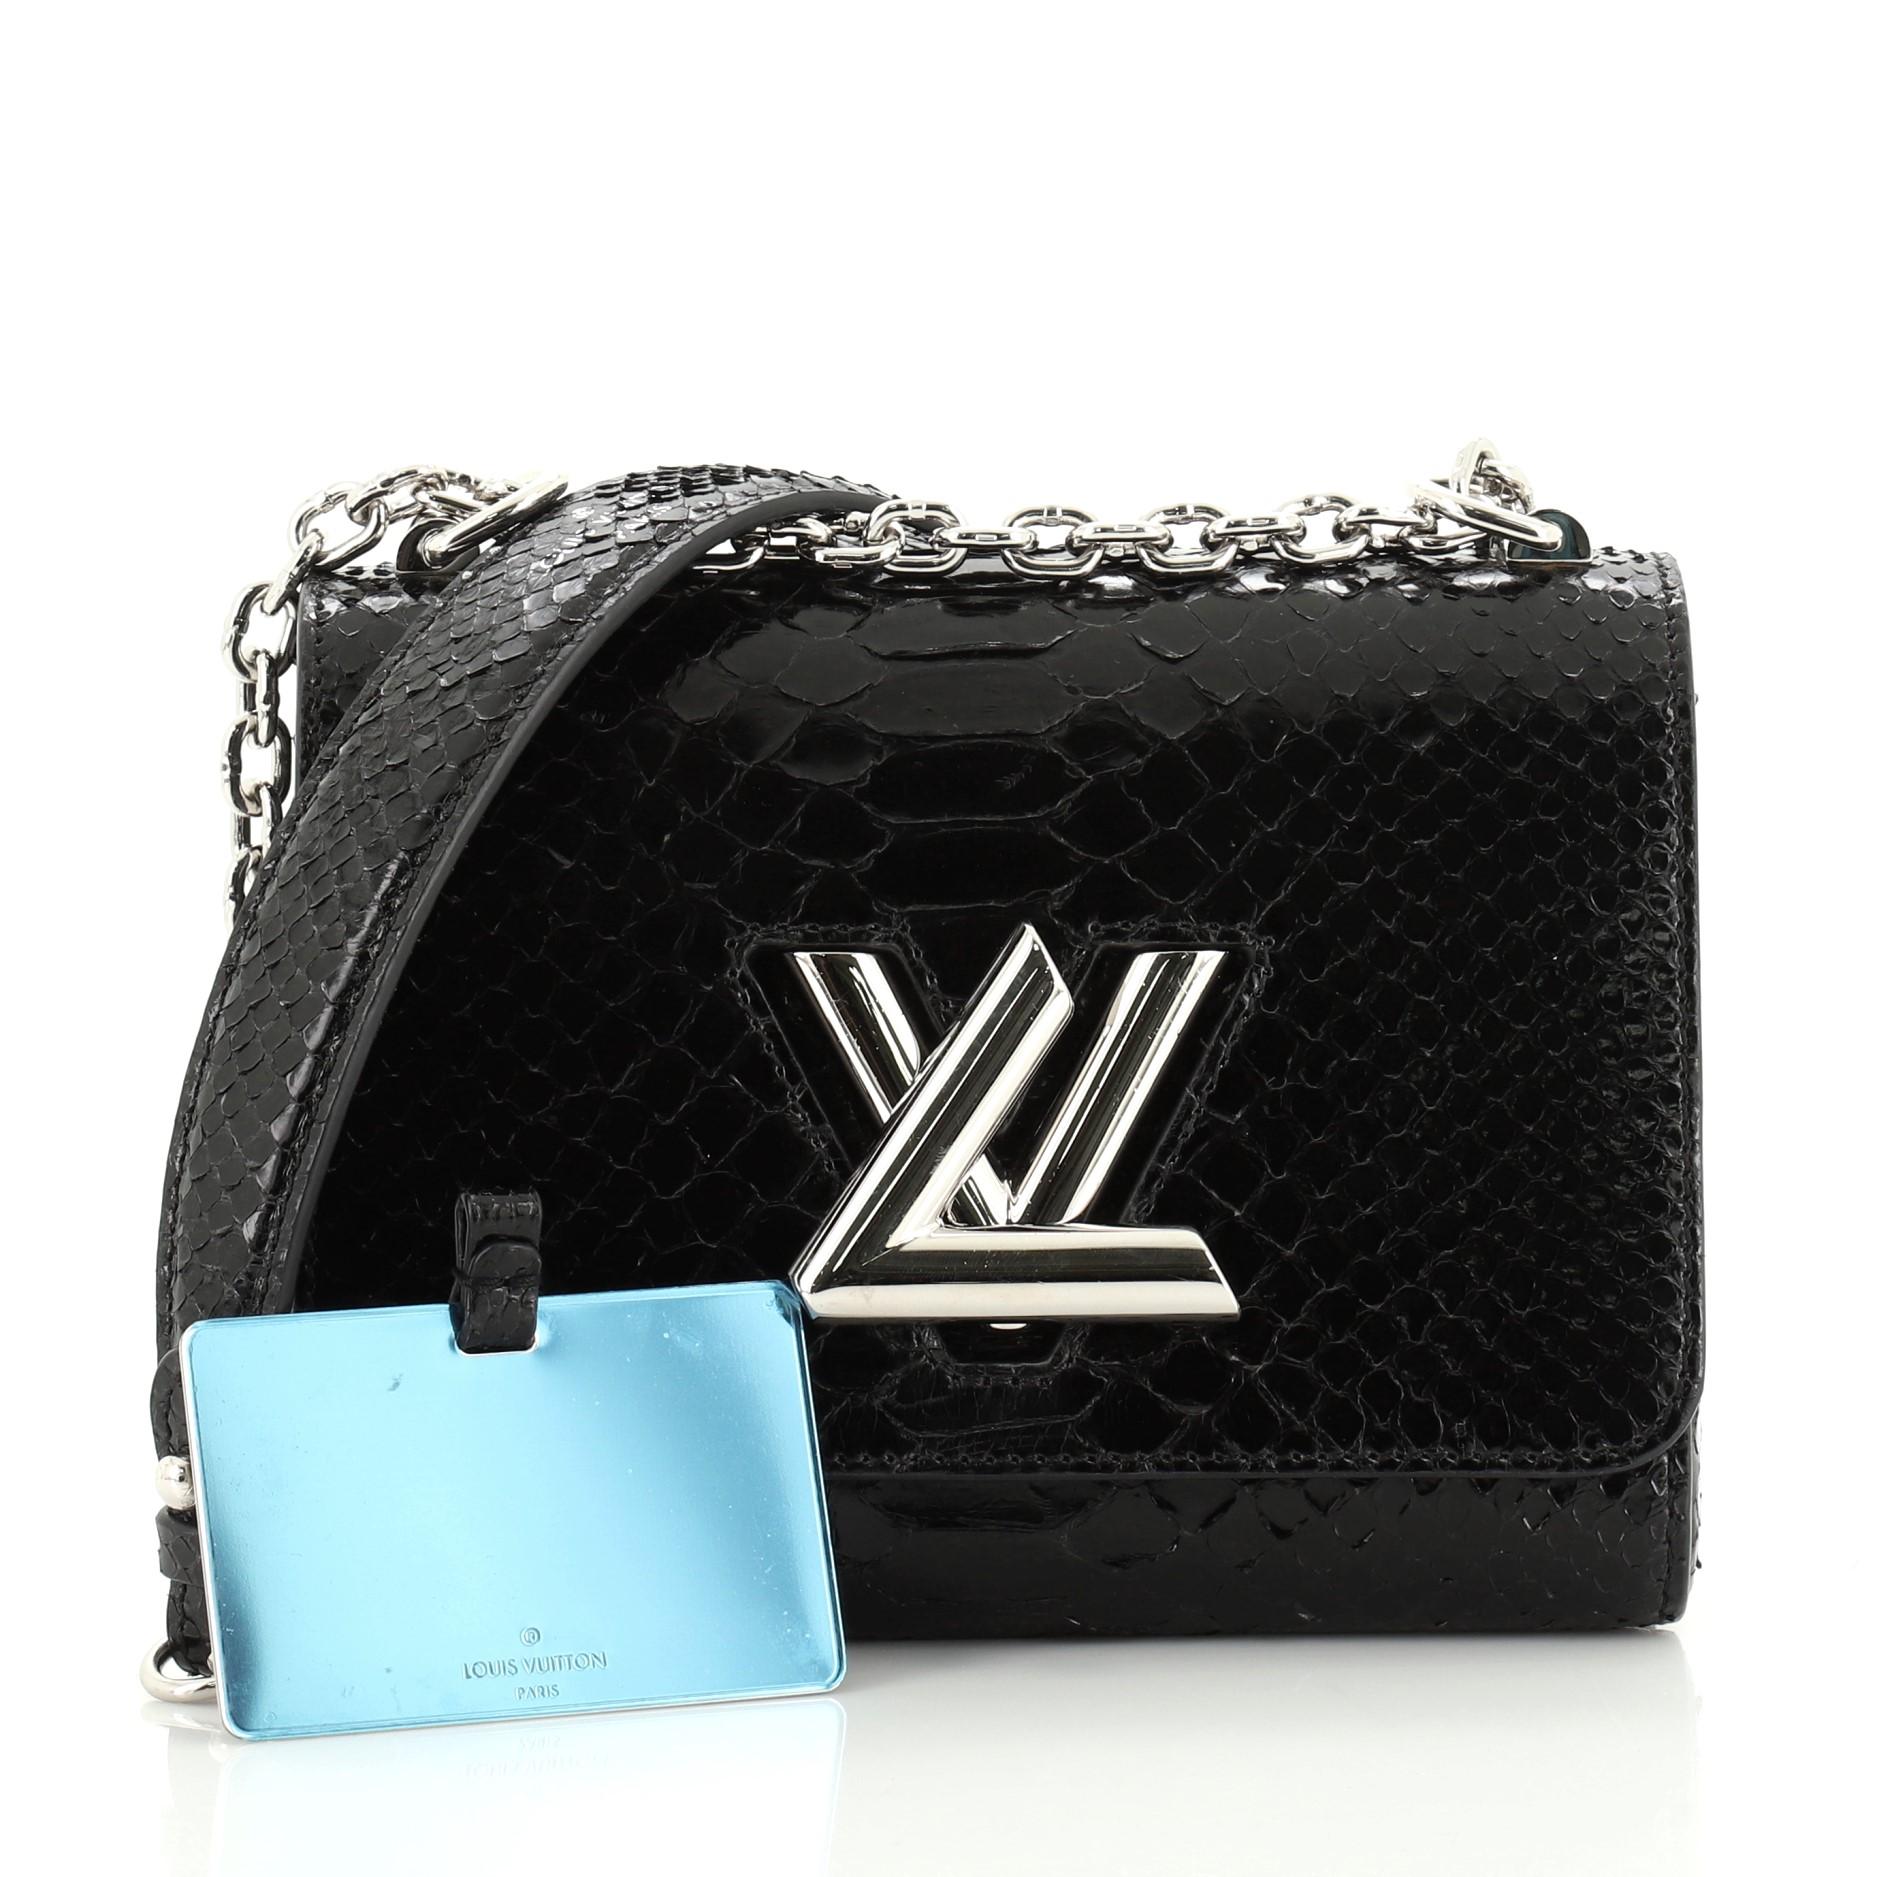 This Louis Vuitton Twist Handbag Python PM, crafted from genuine black python skin, features a chain-link strap with shoulder pads, an LV twist lock and silver-tone hardware. Its twist-lock closure opens to a black leather interior. Authenticity